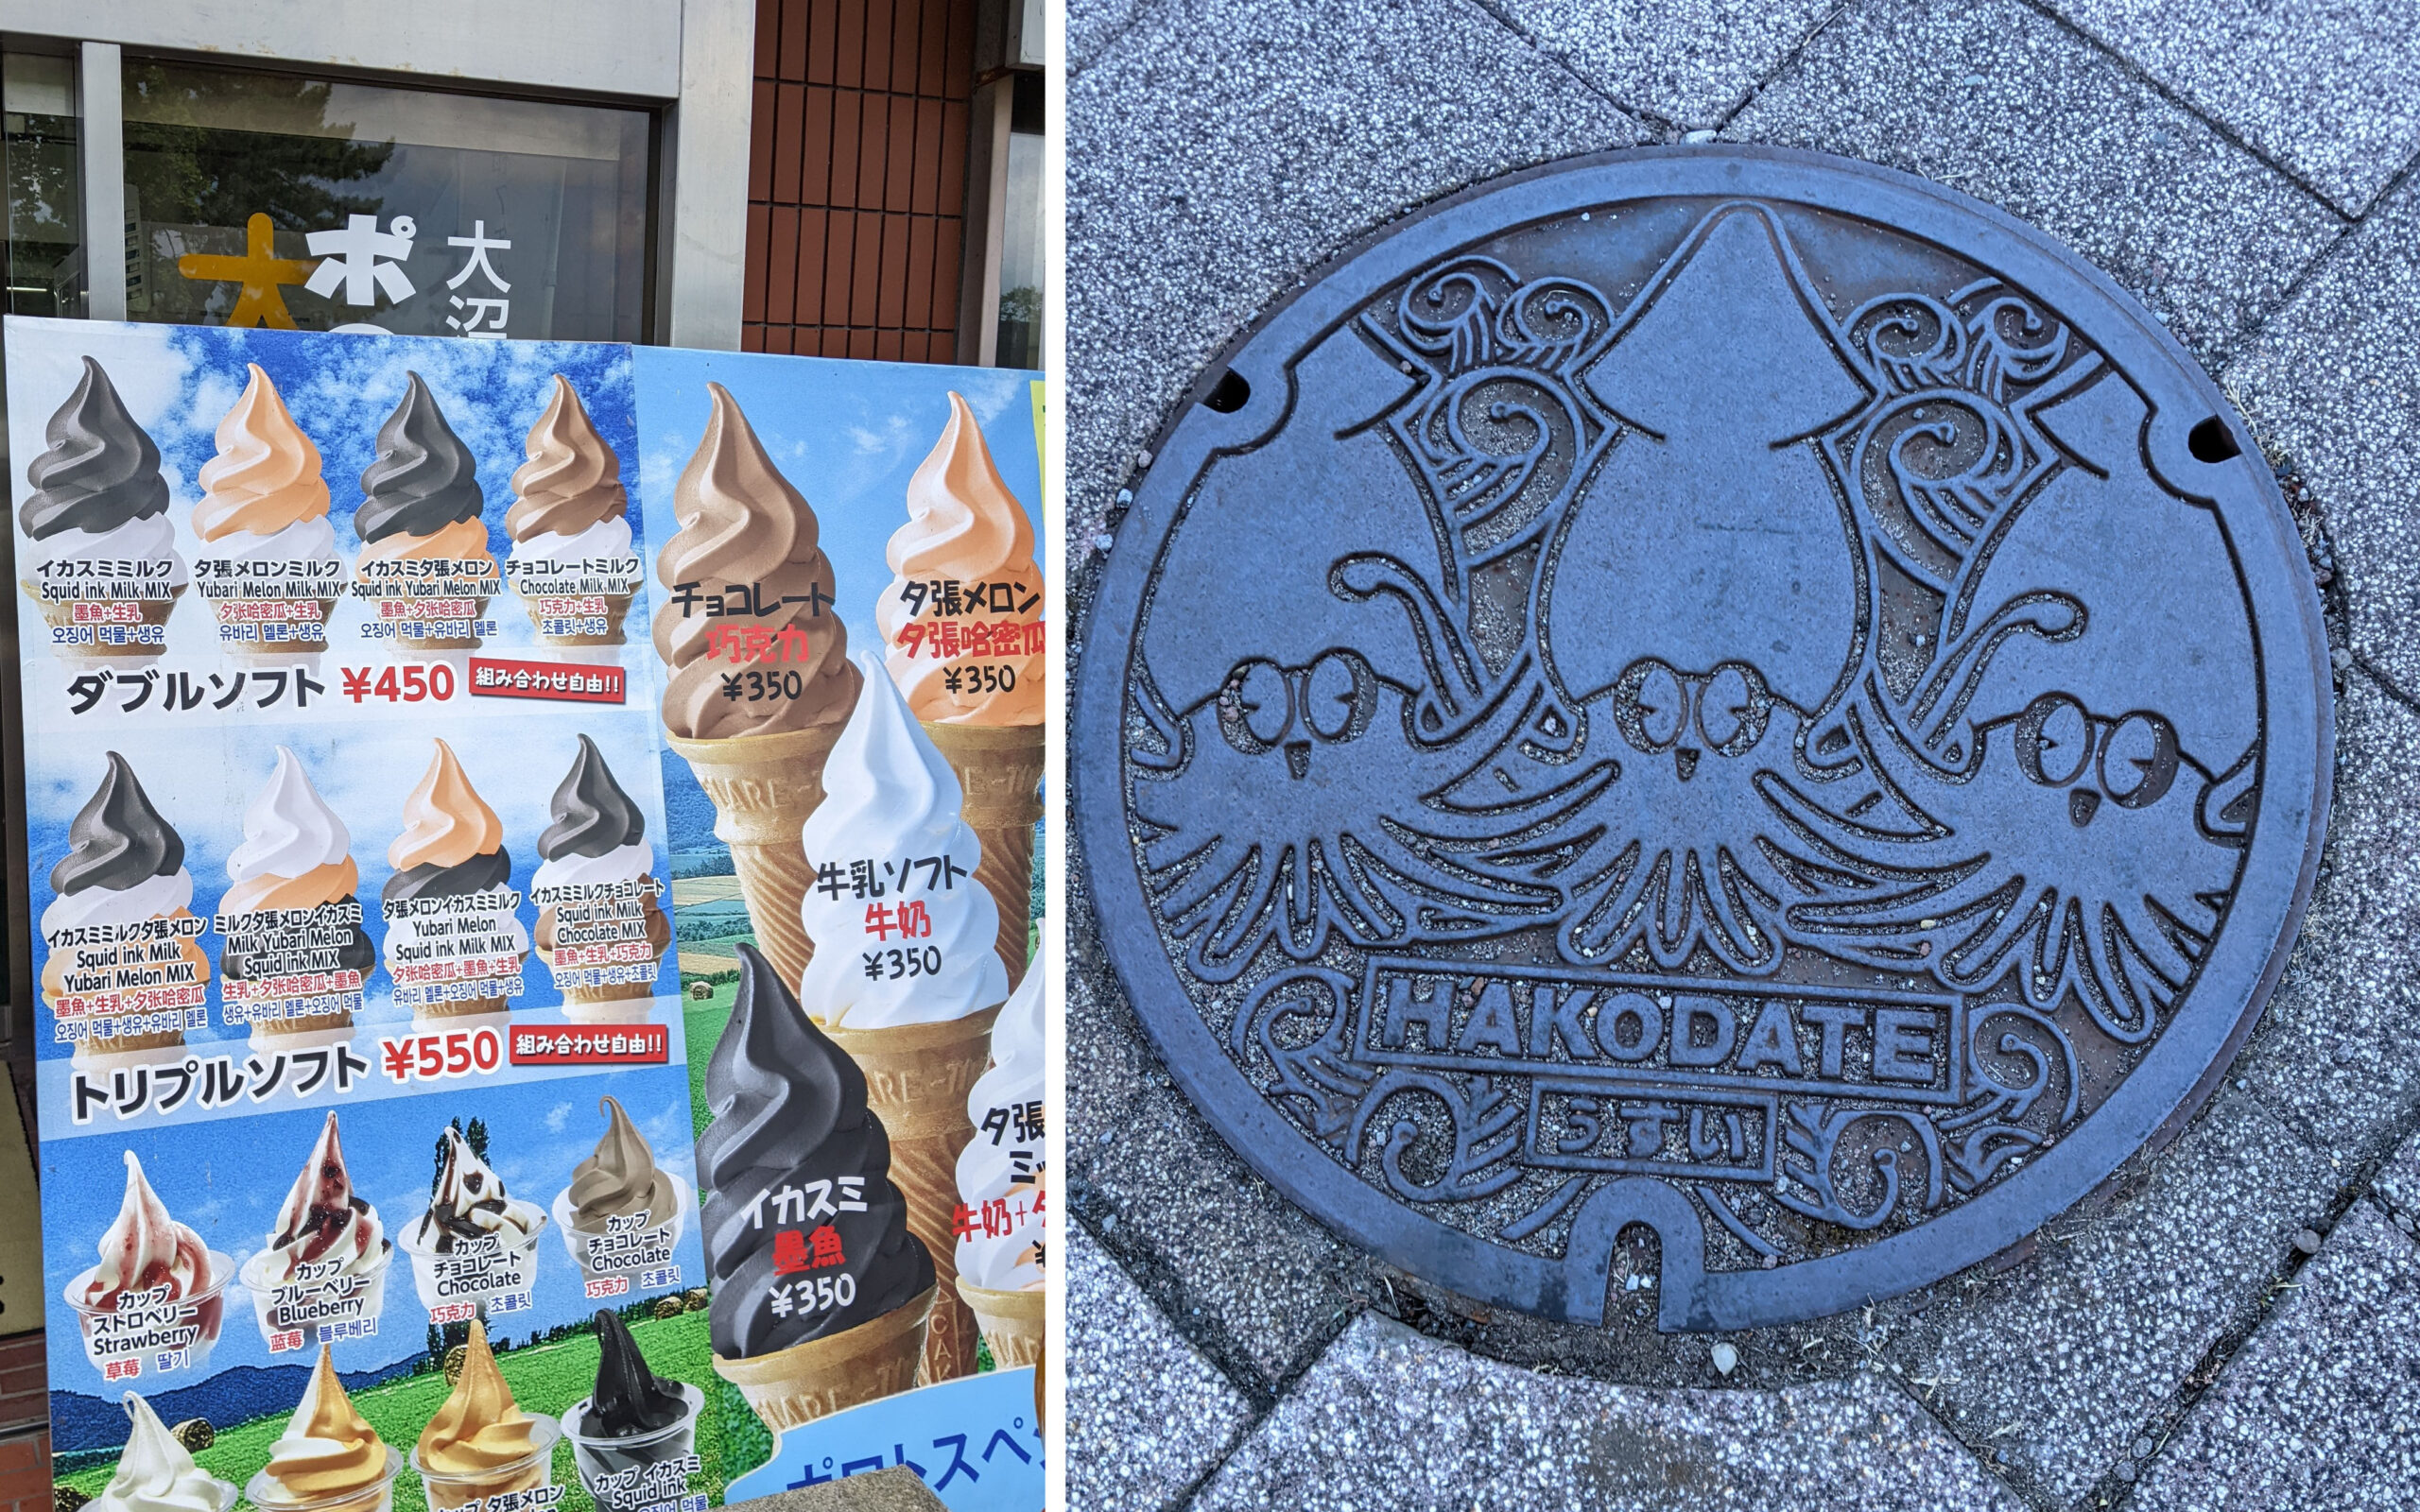 What to do in Hakodate Japan